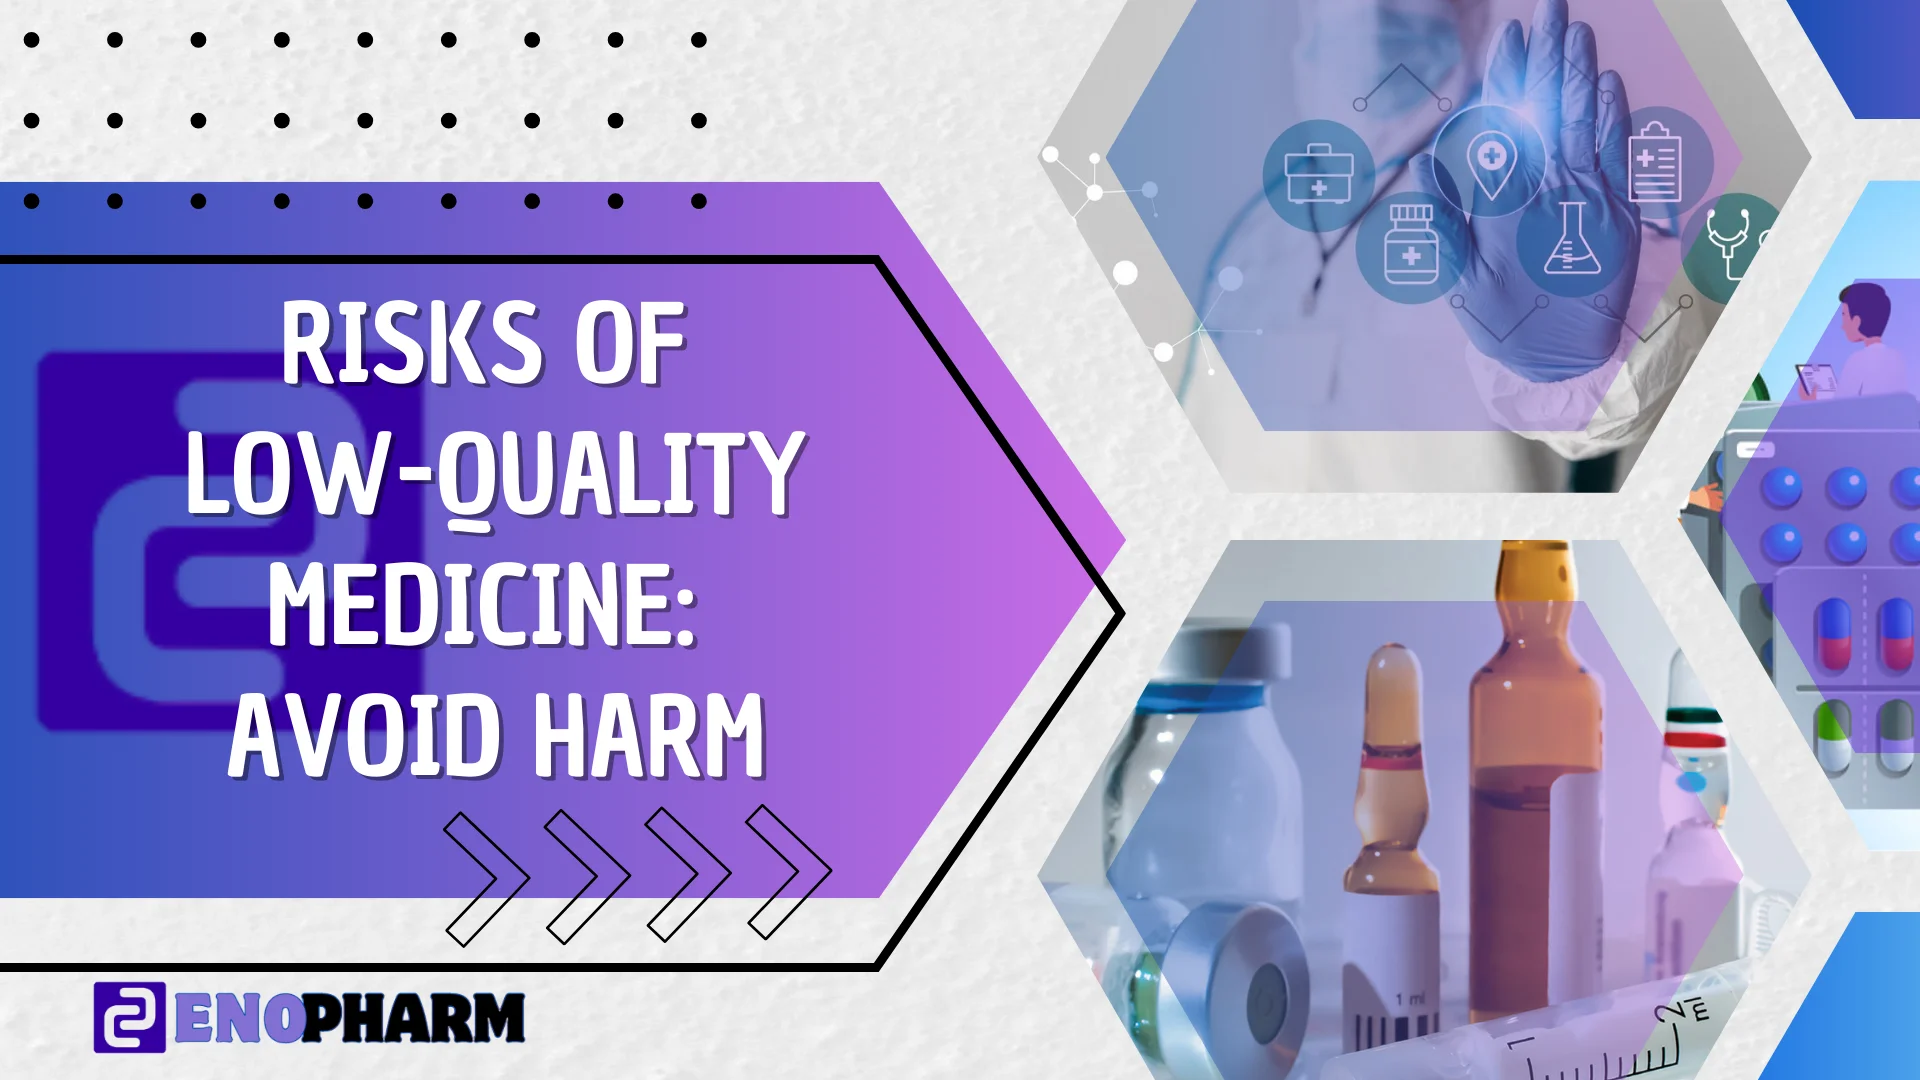 Risks of Low-Quality Medicine - Avoid Harm